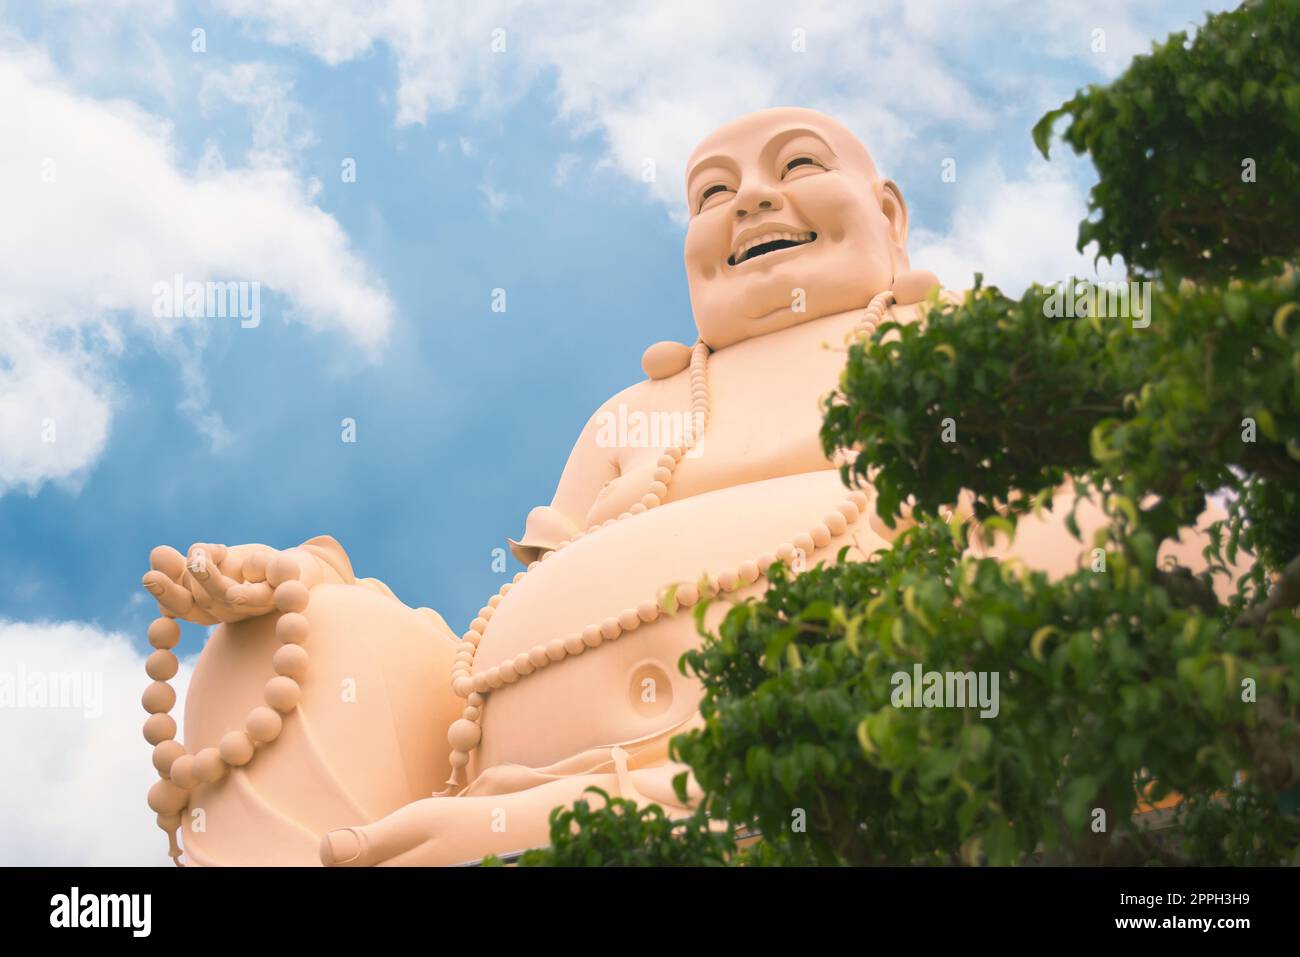 Laughing buddha statue at Vinh Trang temple, near My Tho, Vietnam. Low angle view with bonsai tree on the foreground. Stock Photo